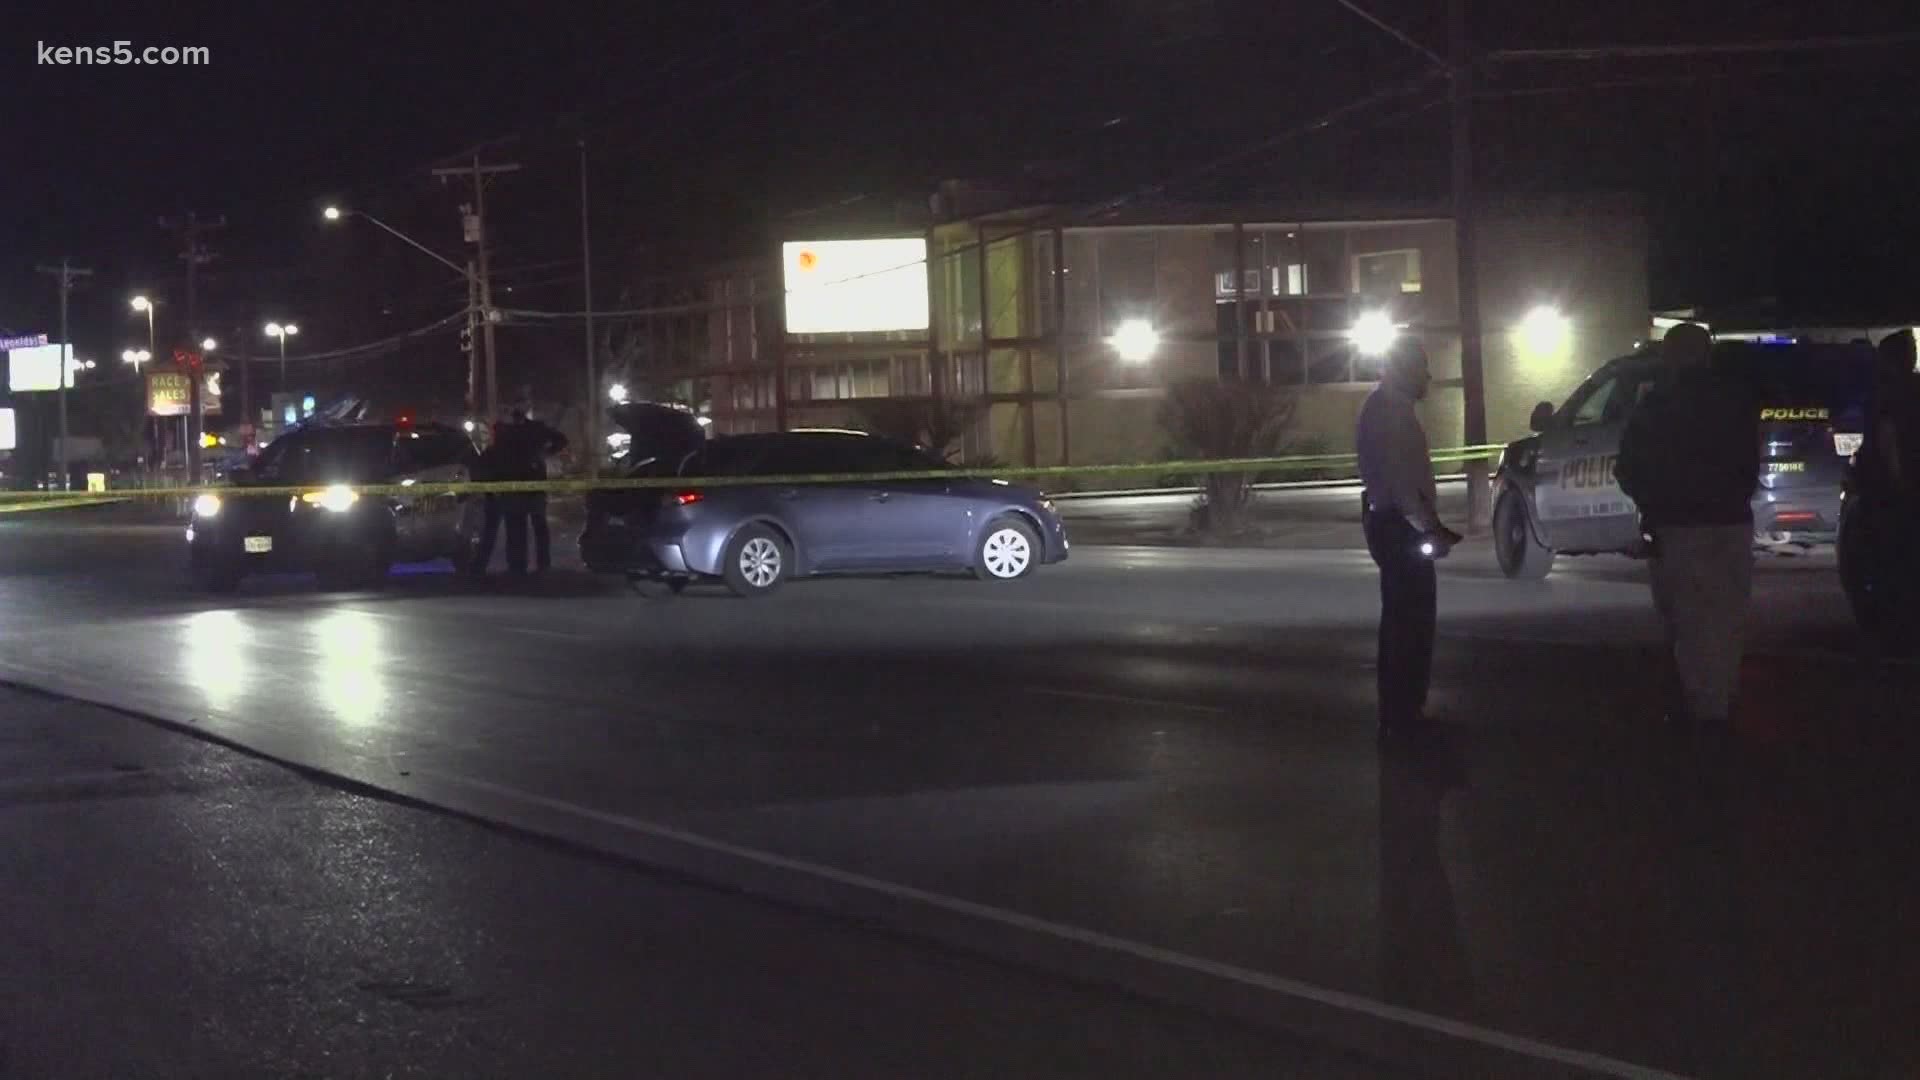 A 17-year-old was shot in the leg while at a gas station Friday night.